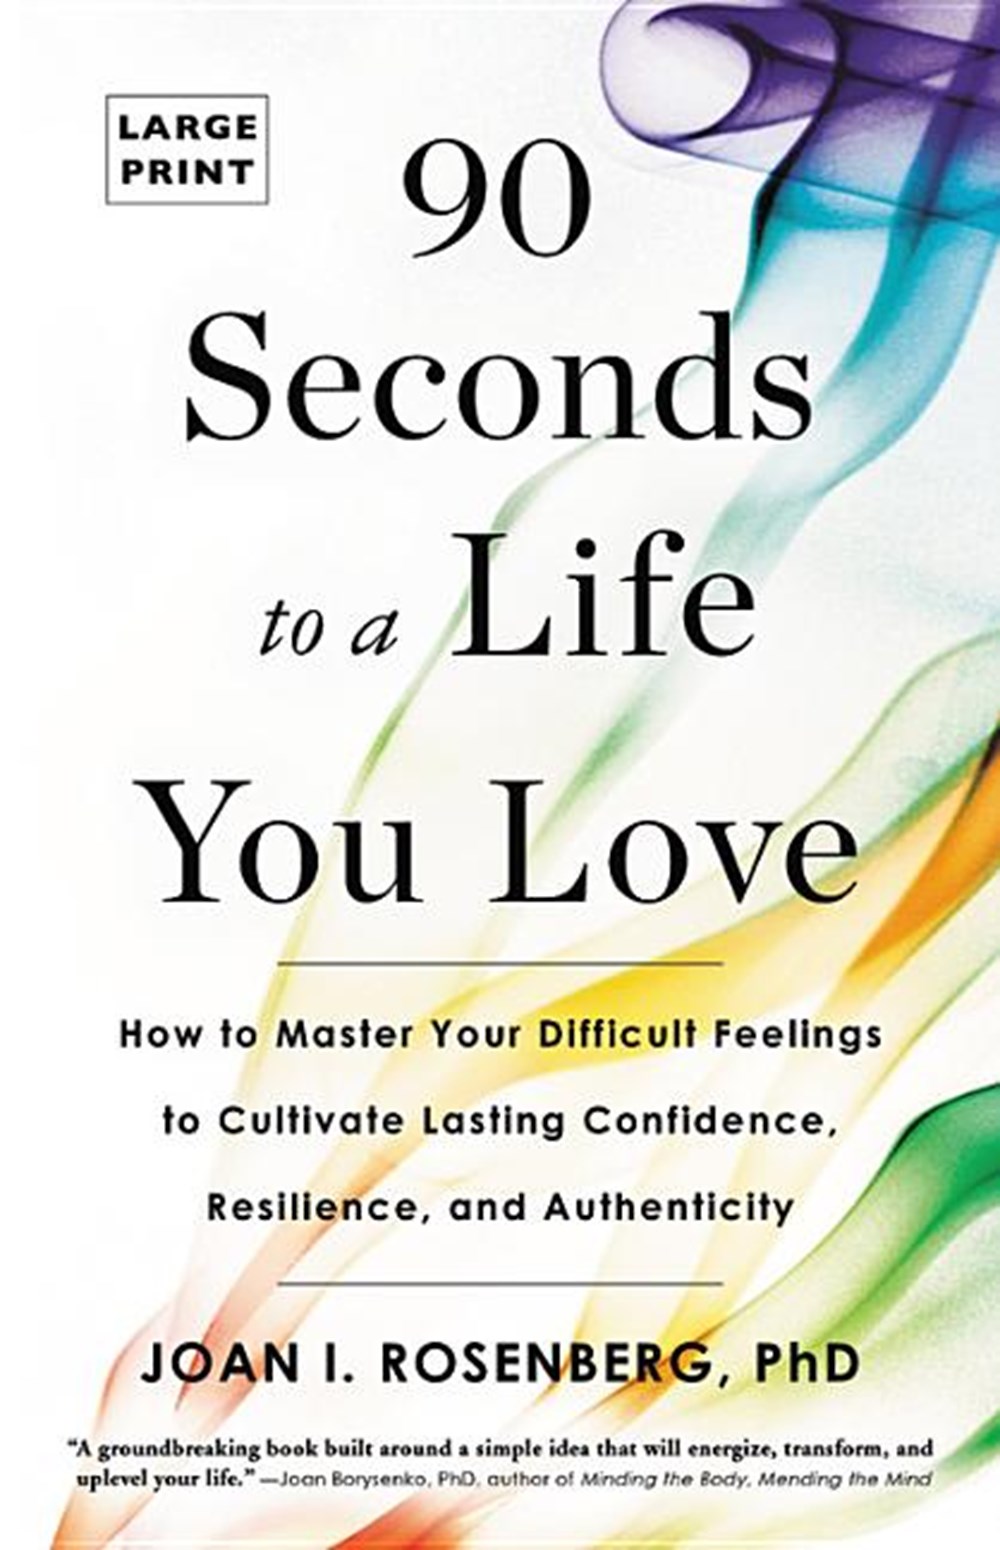 90 Seconds to a Life You Love How to Master Your Difficult Feelings to Cultivate Lasting Confidence,